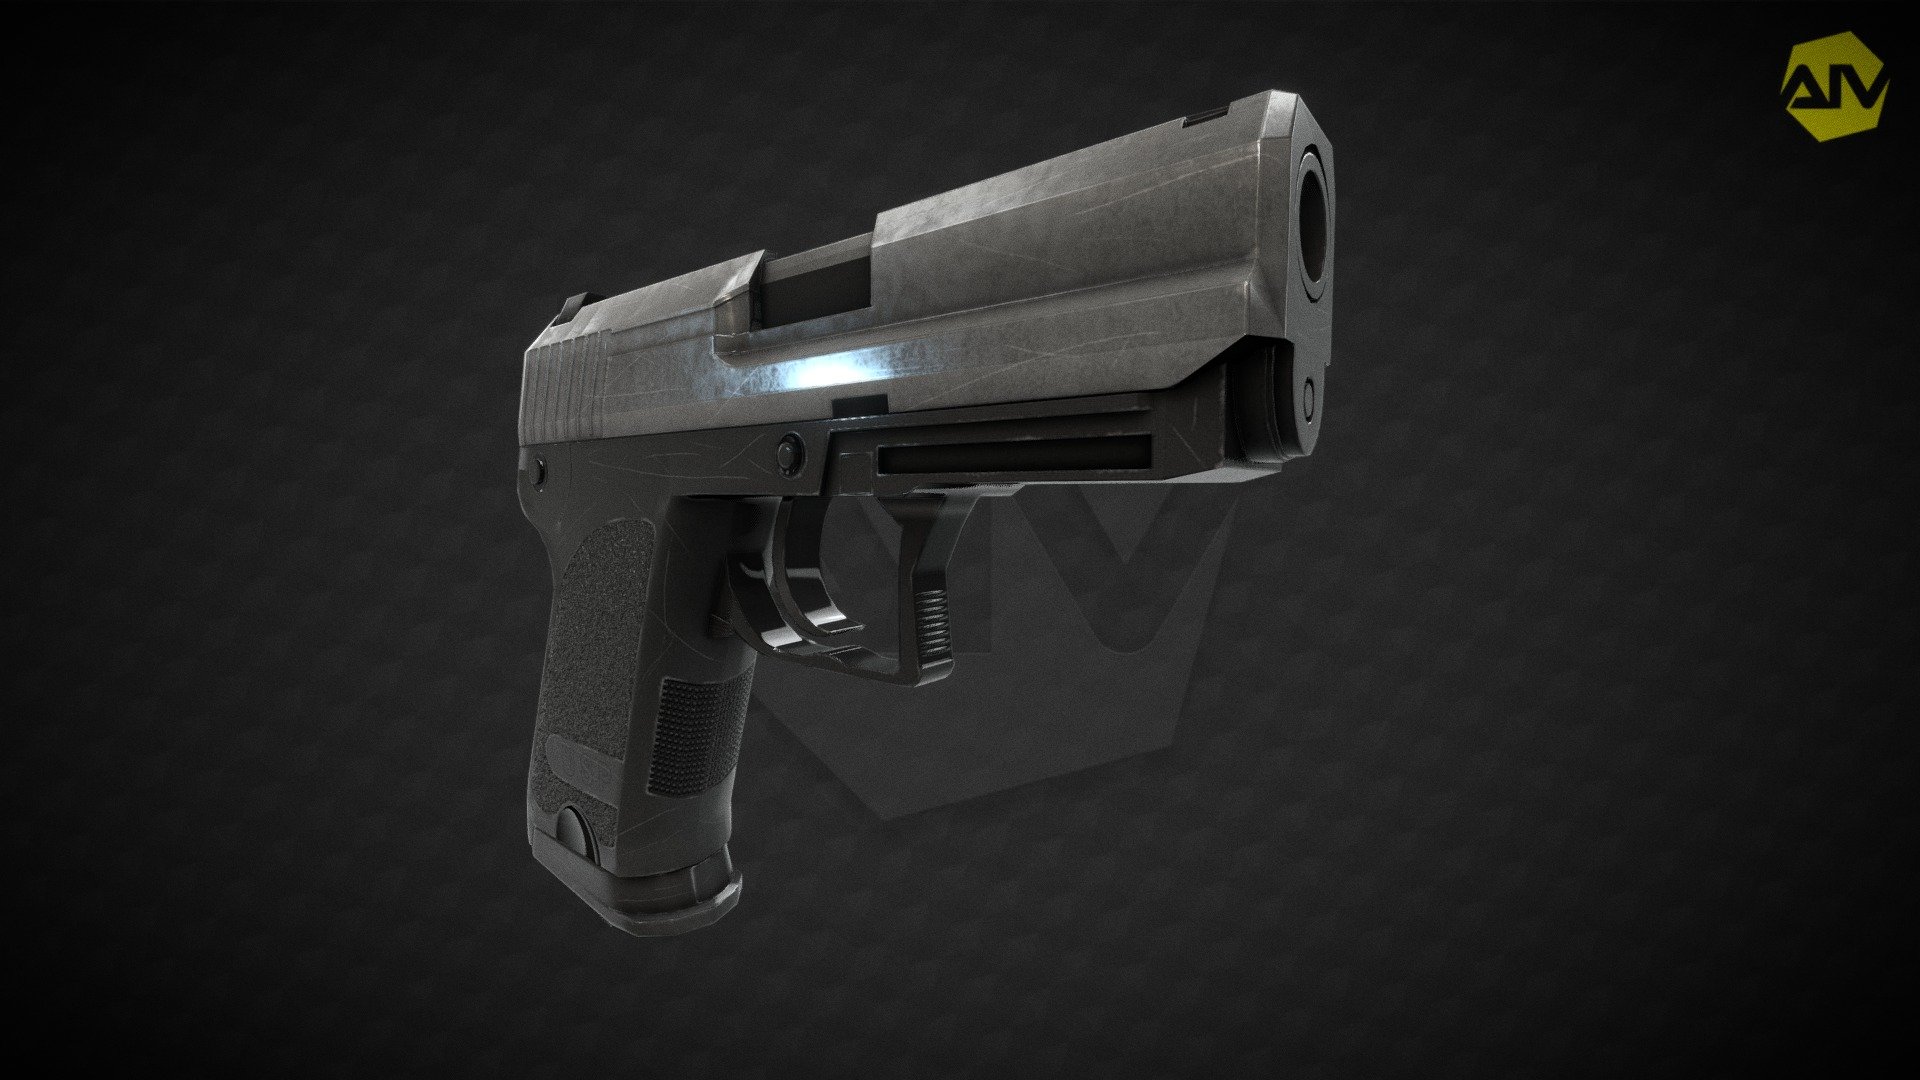 USP- Compact-45 - by Alessandro Furno - 3D model by AIV [cf07cbf ...